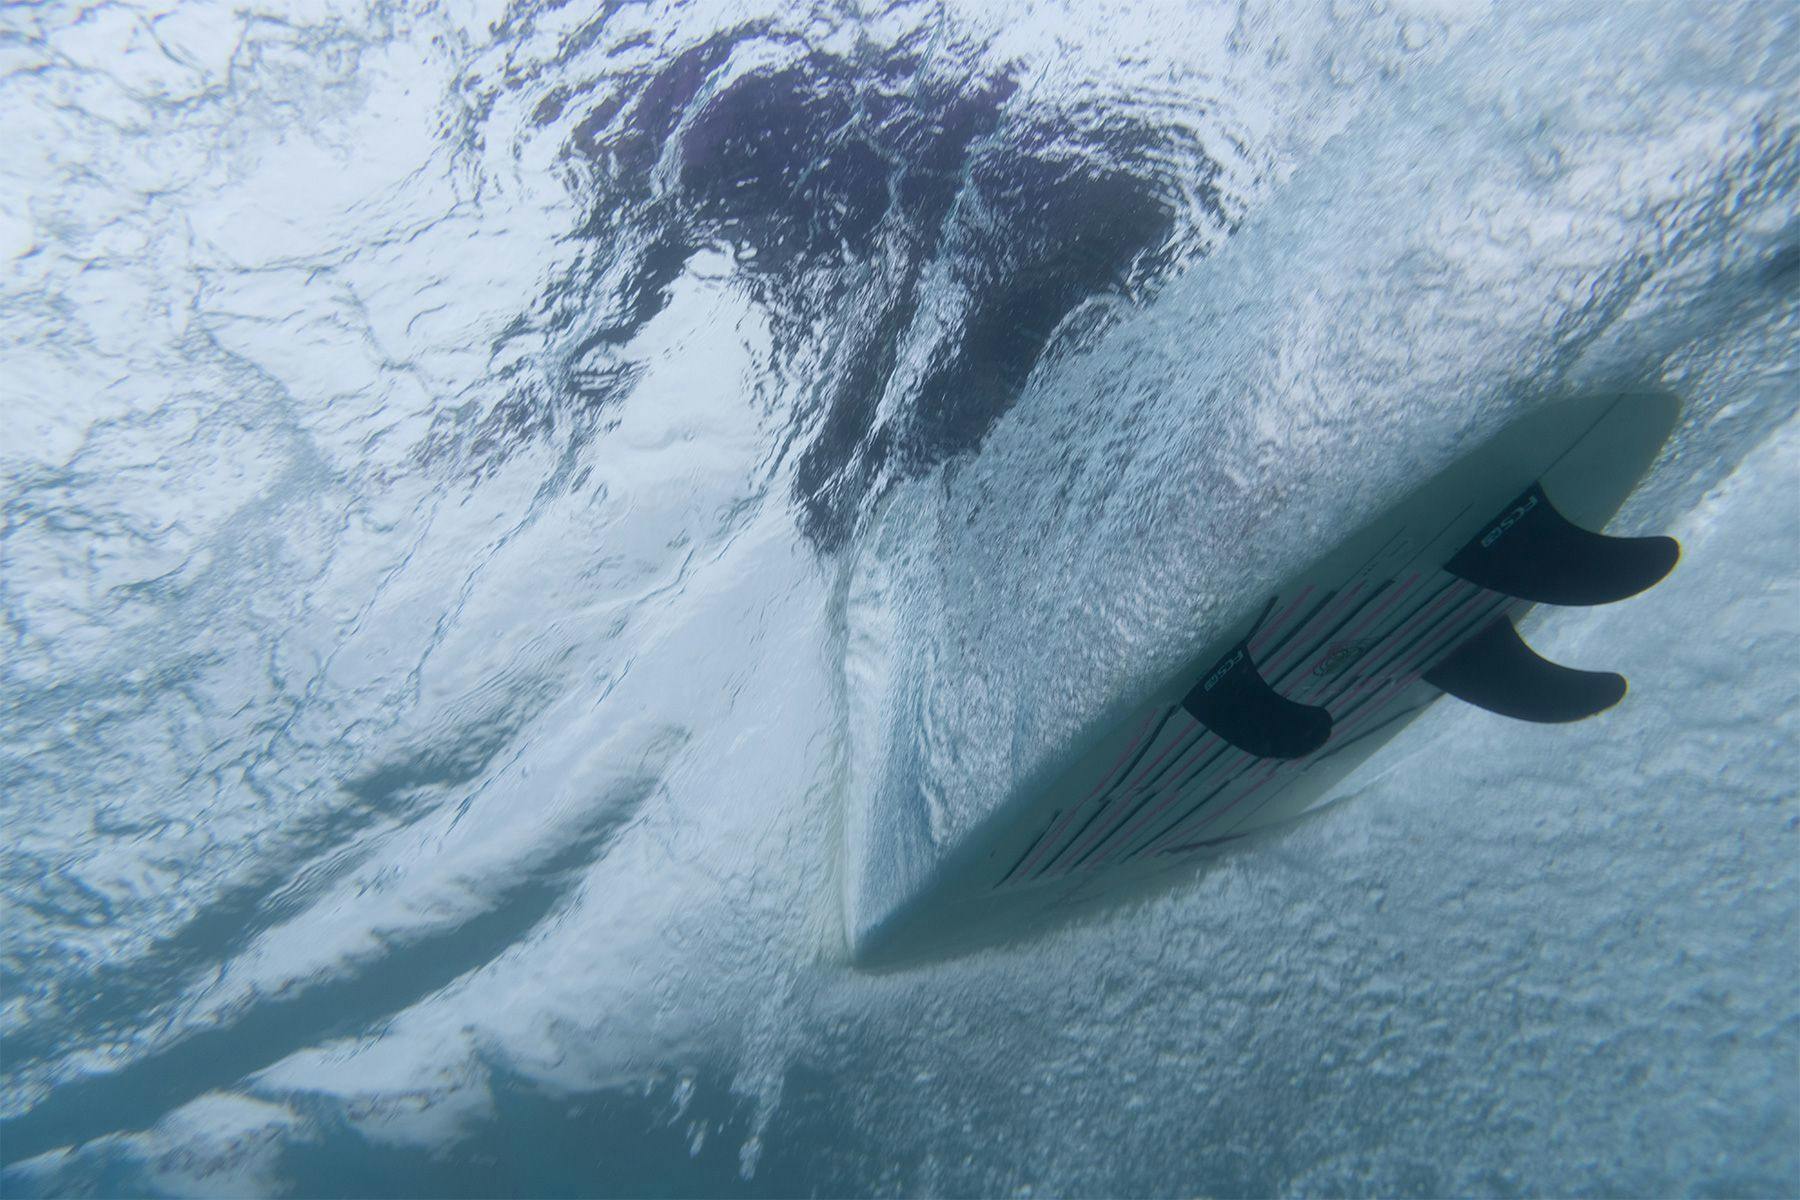 underwater view of a surfboard with telltale ribbons showing the flow of water and fluid dynamics across the underside of the surfboard